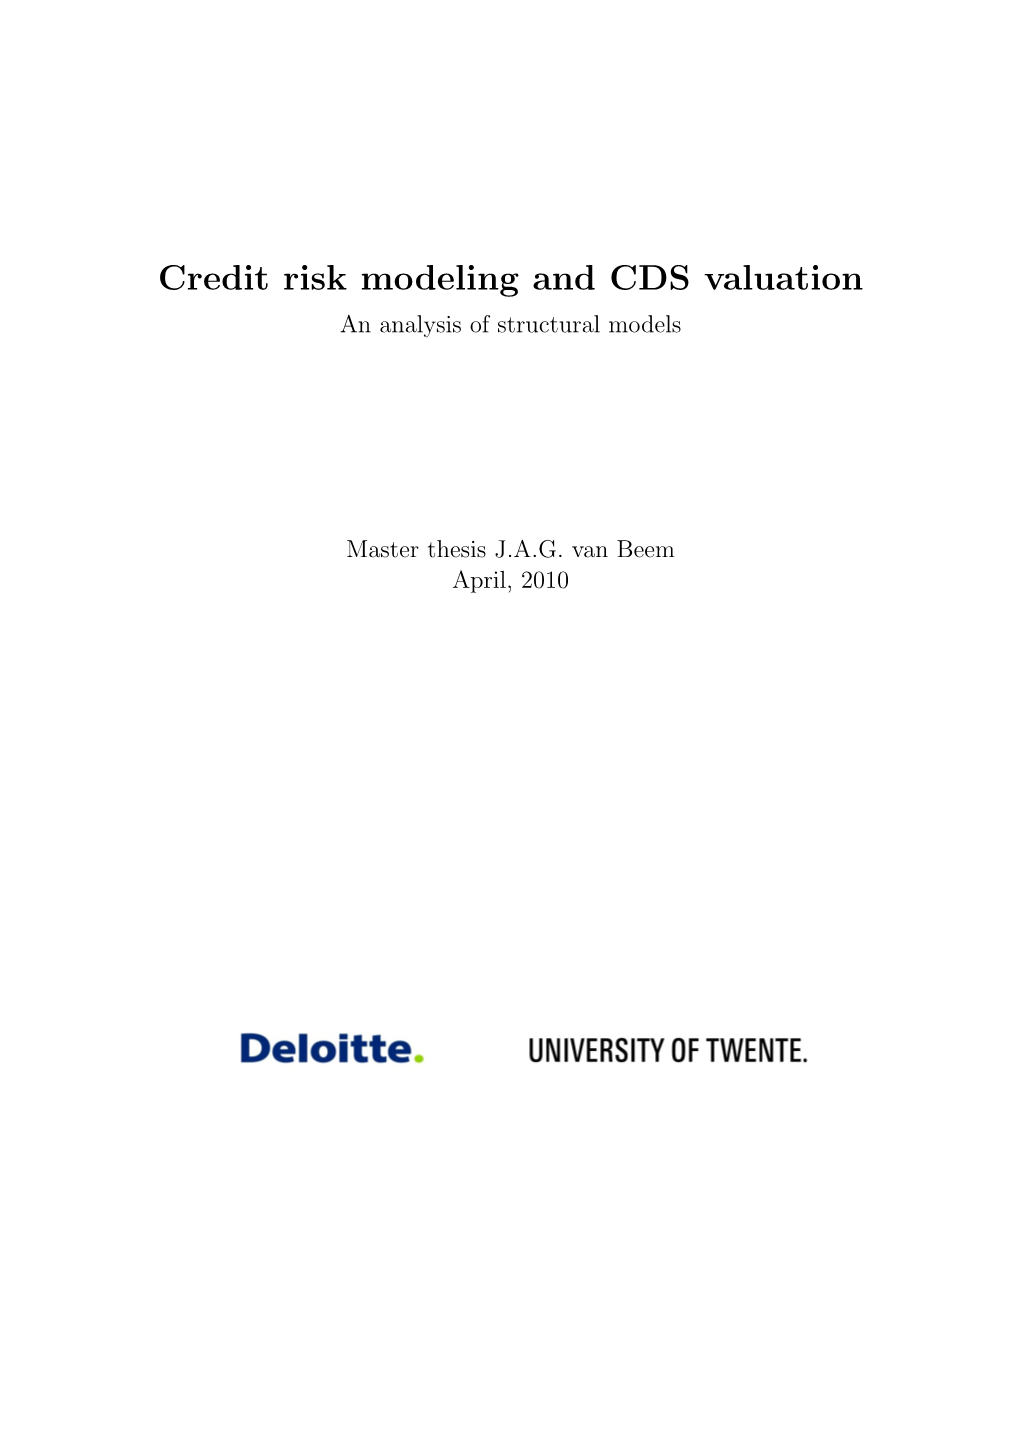 Credit Risk Modeling and CDS Valuation